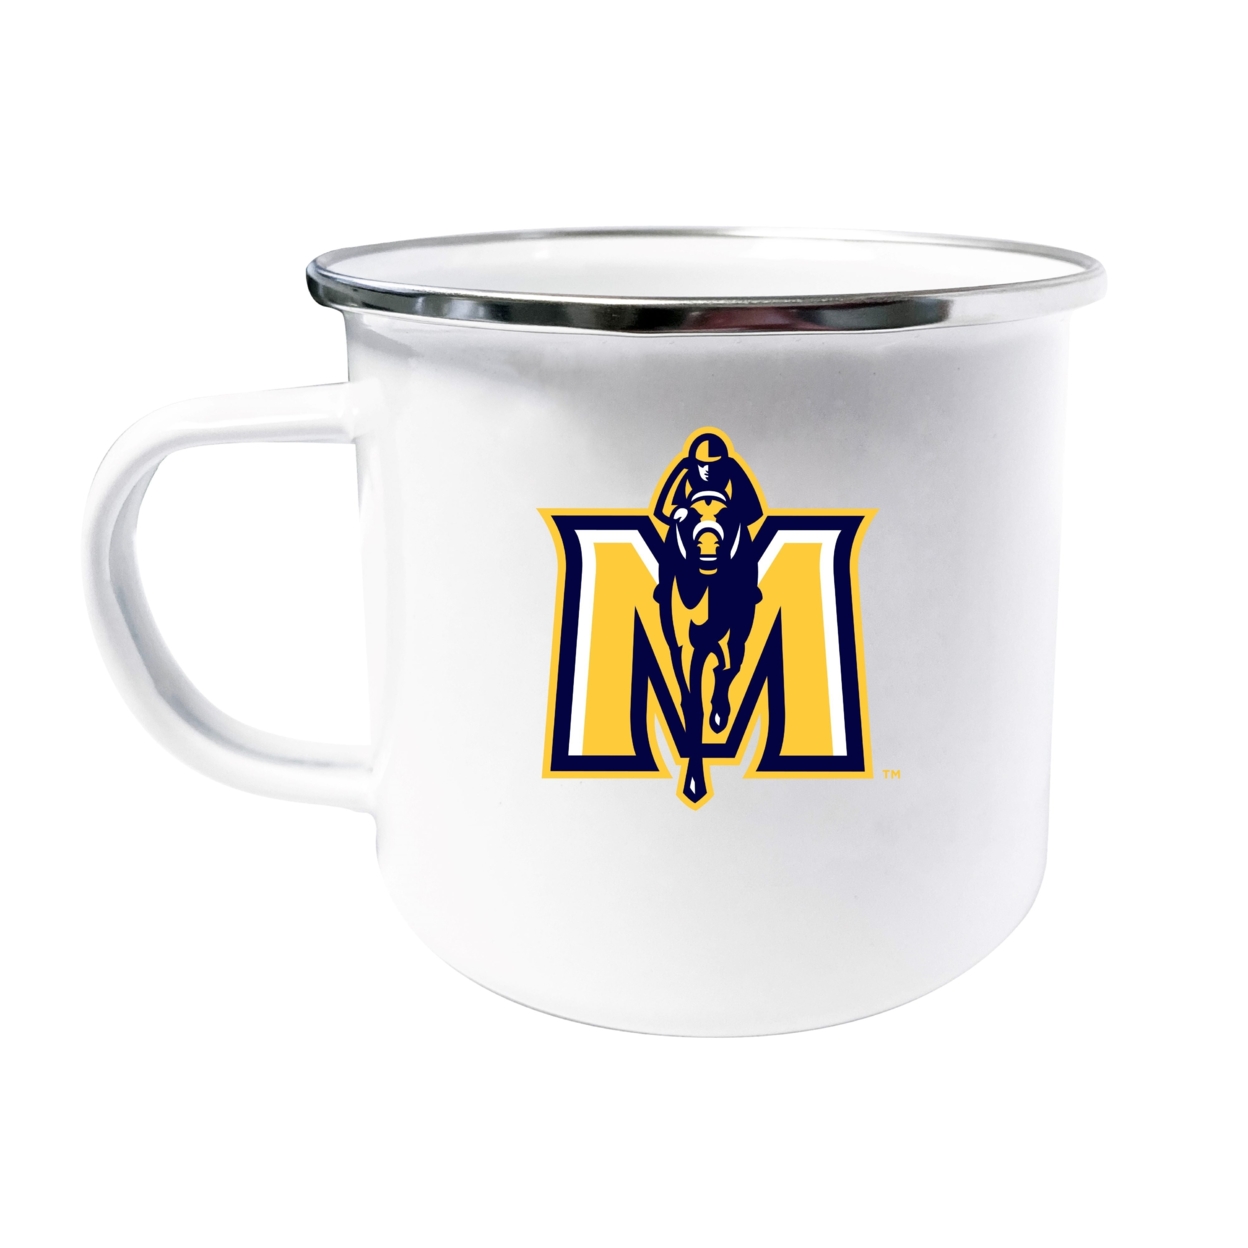 Murray State University Tin Camper Coffee Mug - Choose Your Color - White